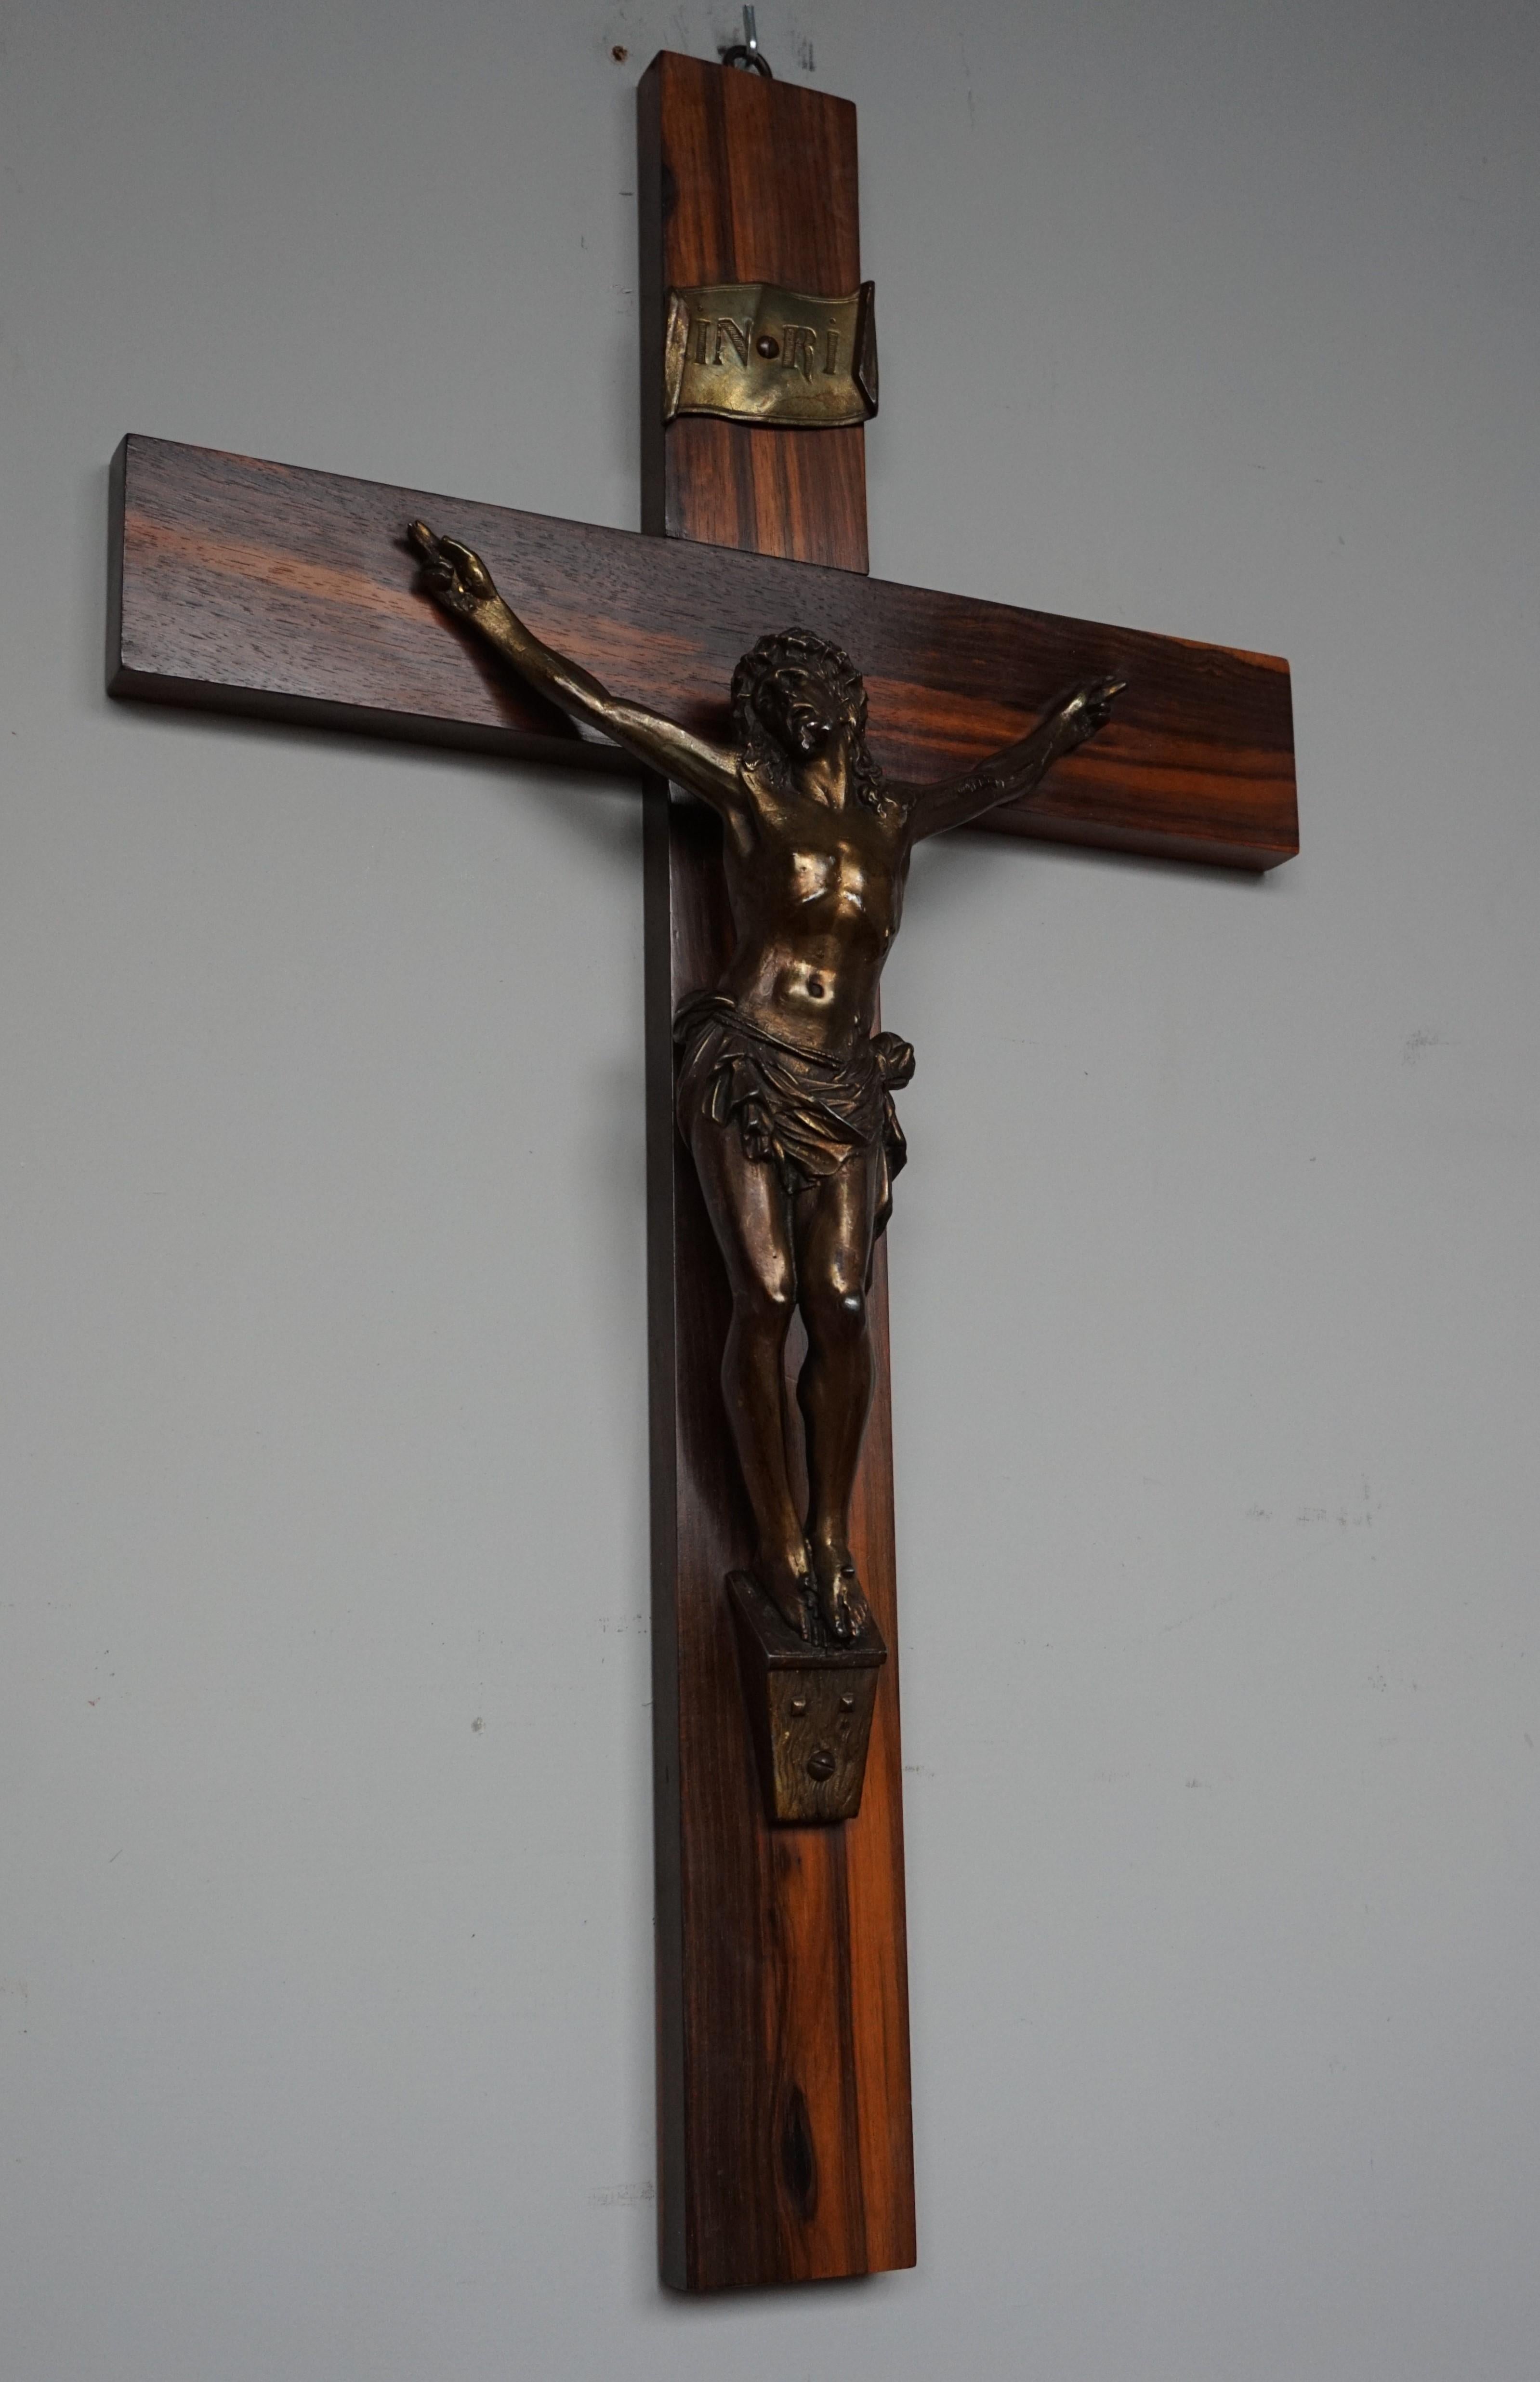 Rare and stunning wooden cross with a sculpture of Christ suffering.

This striking and good size crucifix is in original and very good condition. Most (young) people won't realize, but in order to spiritually and mentally grow in life, some